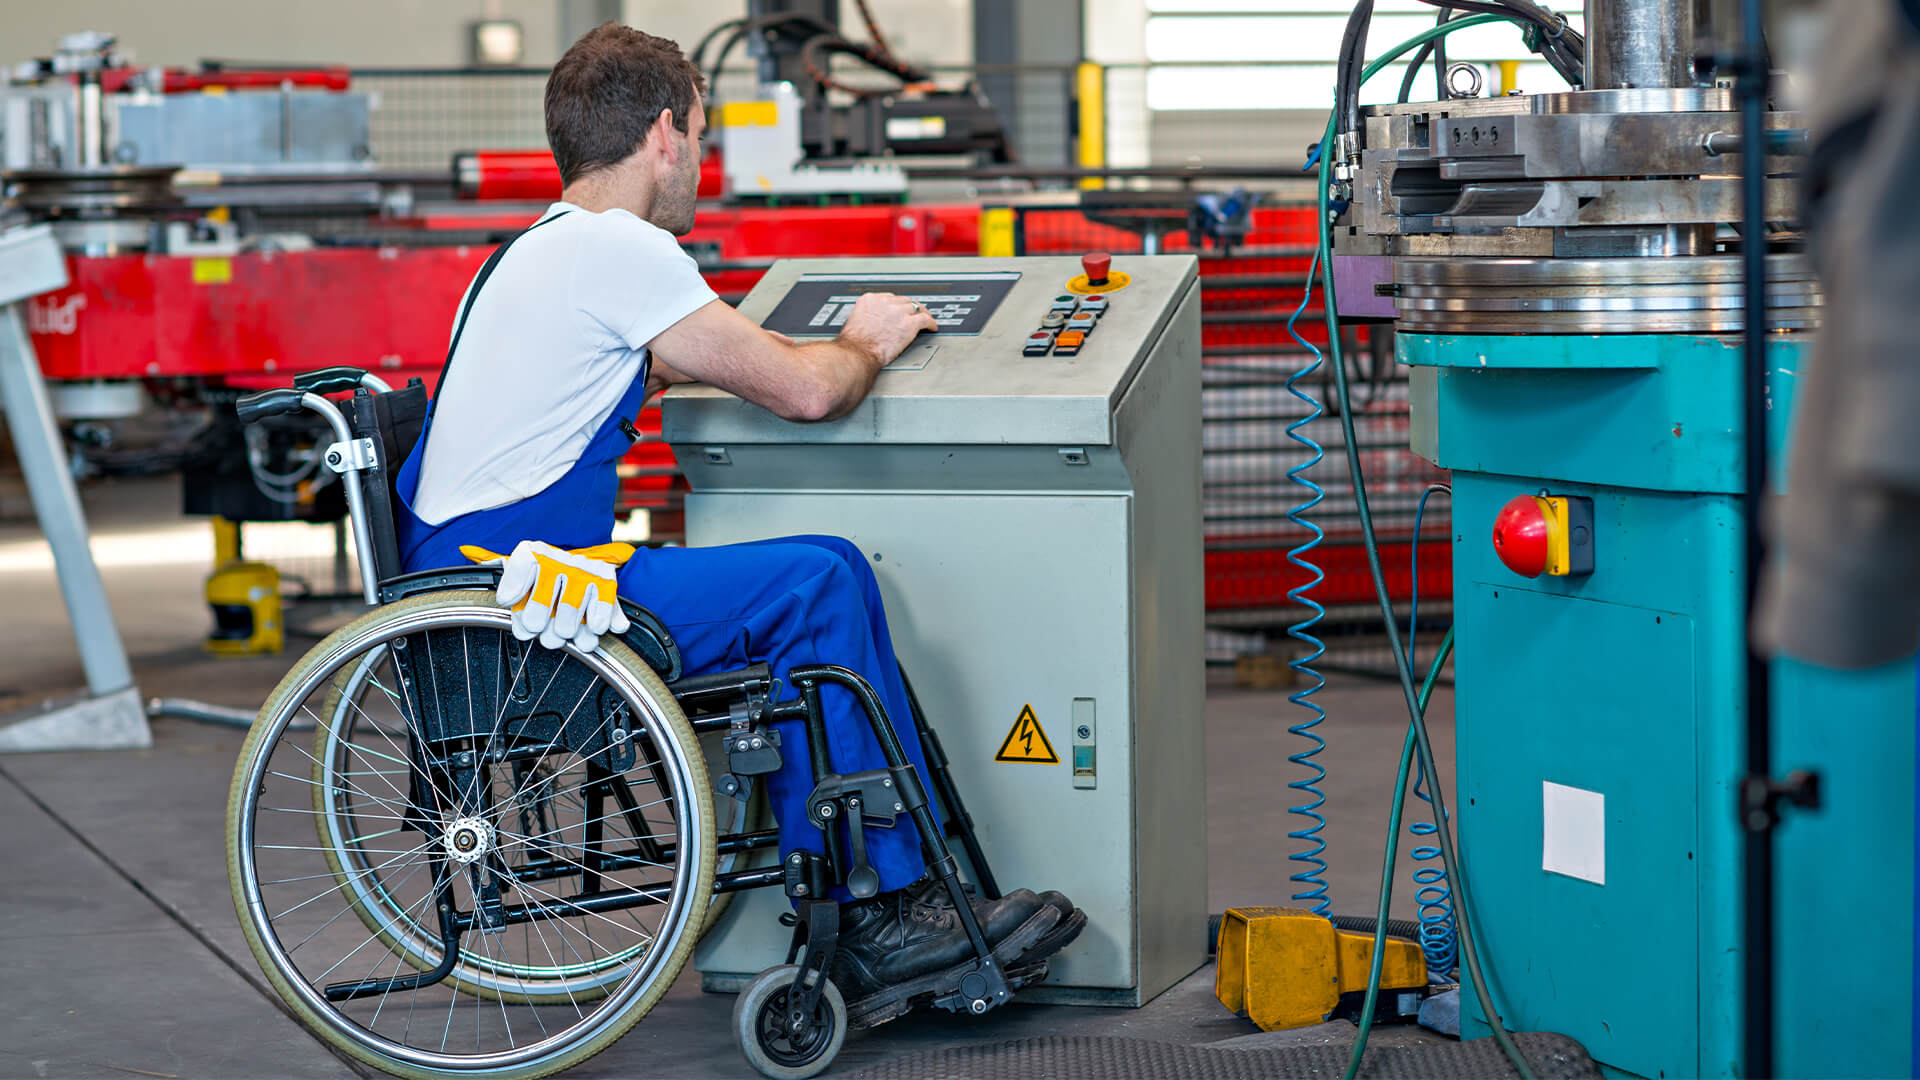 Disabled man working as an engineer in a factory